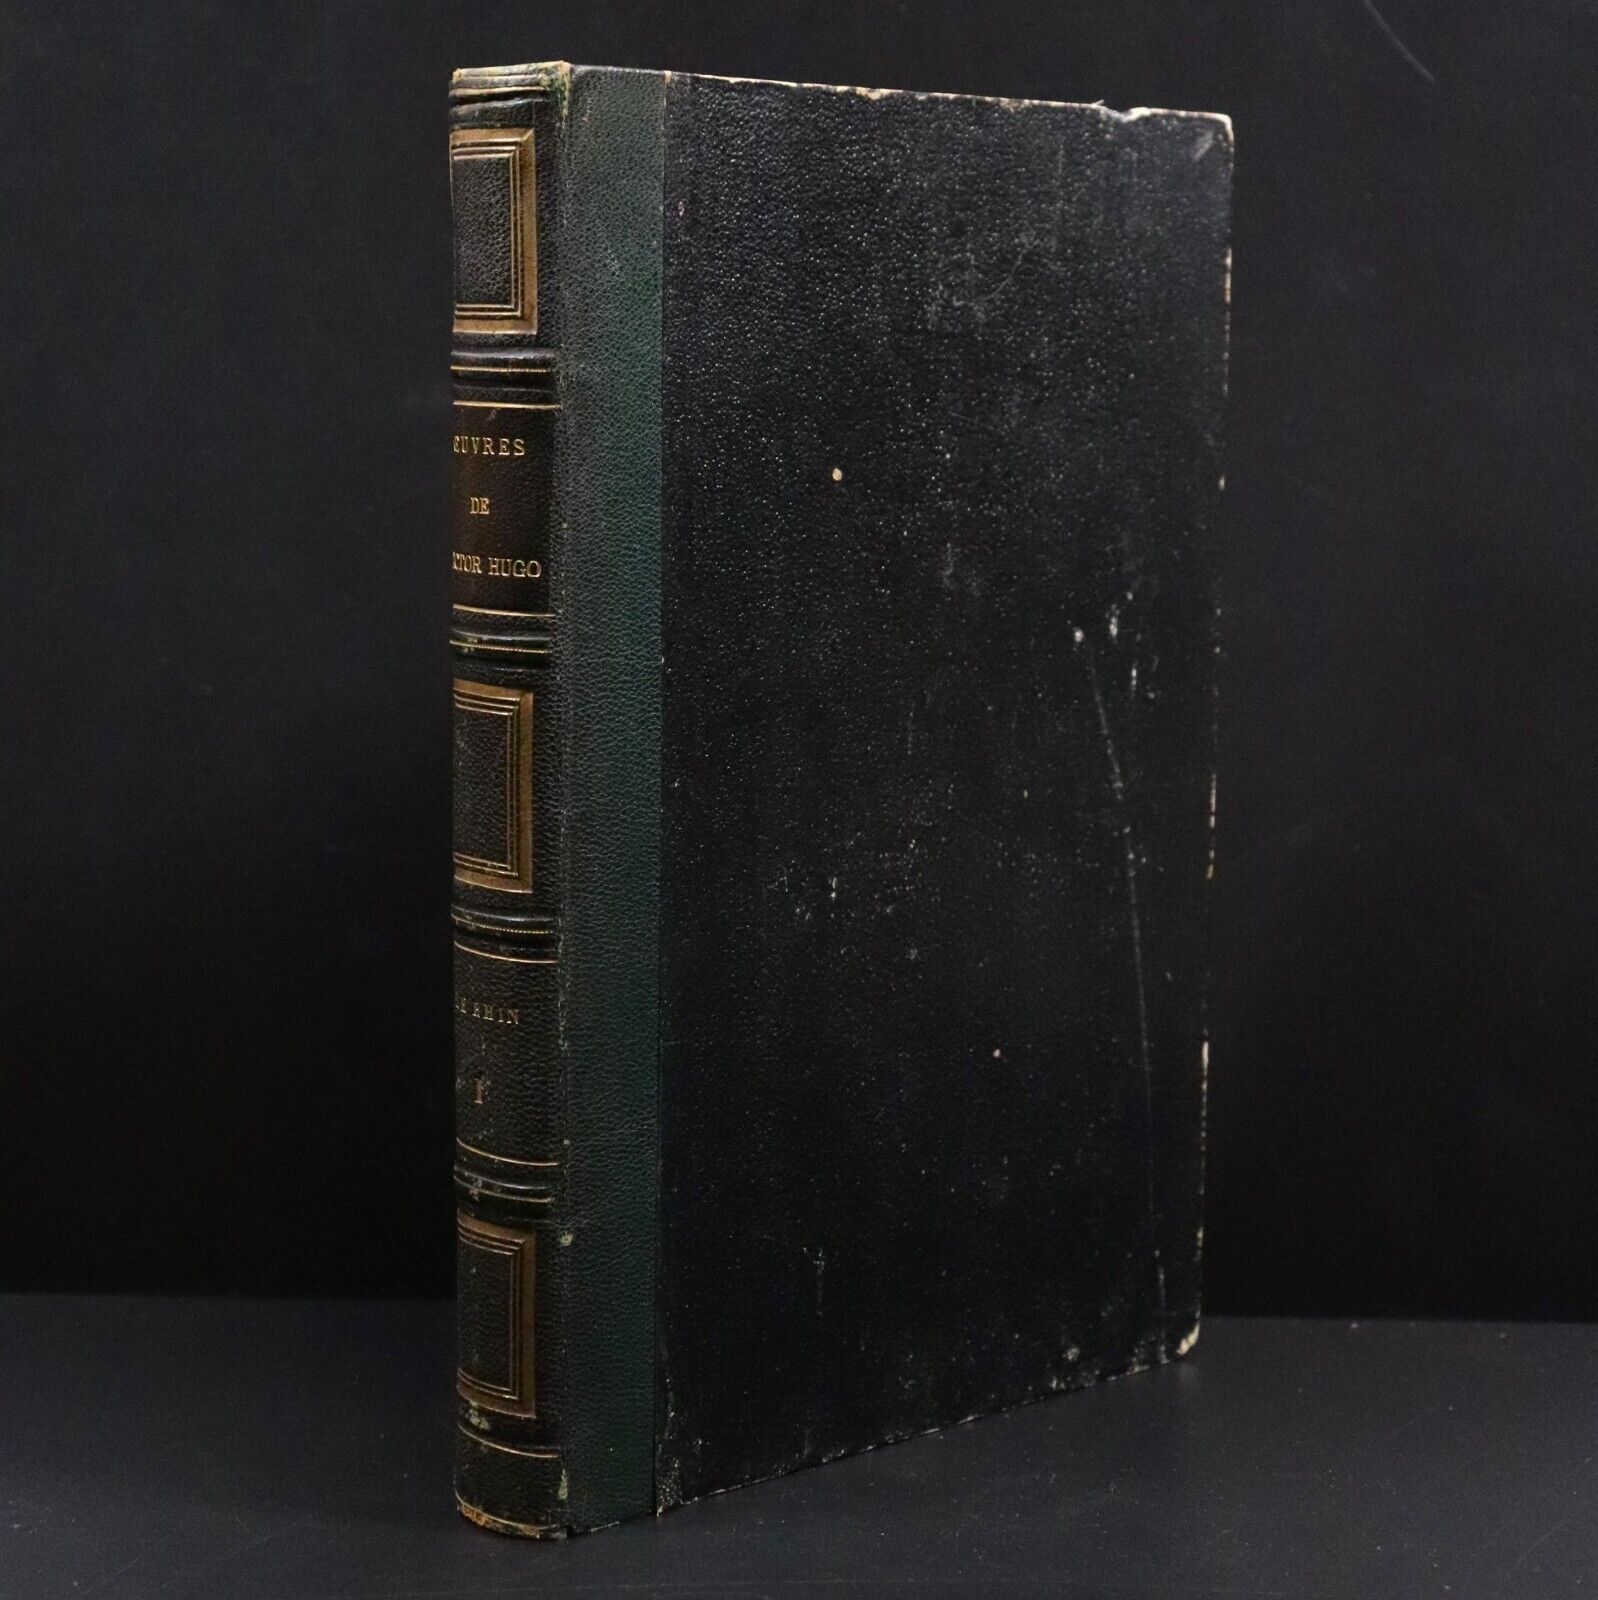 1846 Oeuvres Victor Hugo Le Rhin Lettres A Un Ami Antiquarian French Book